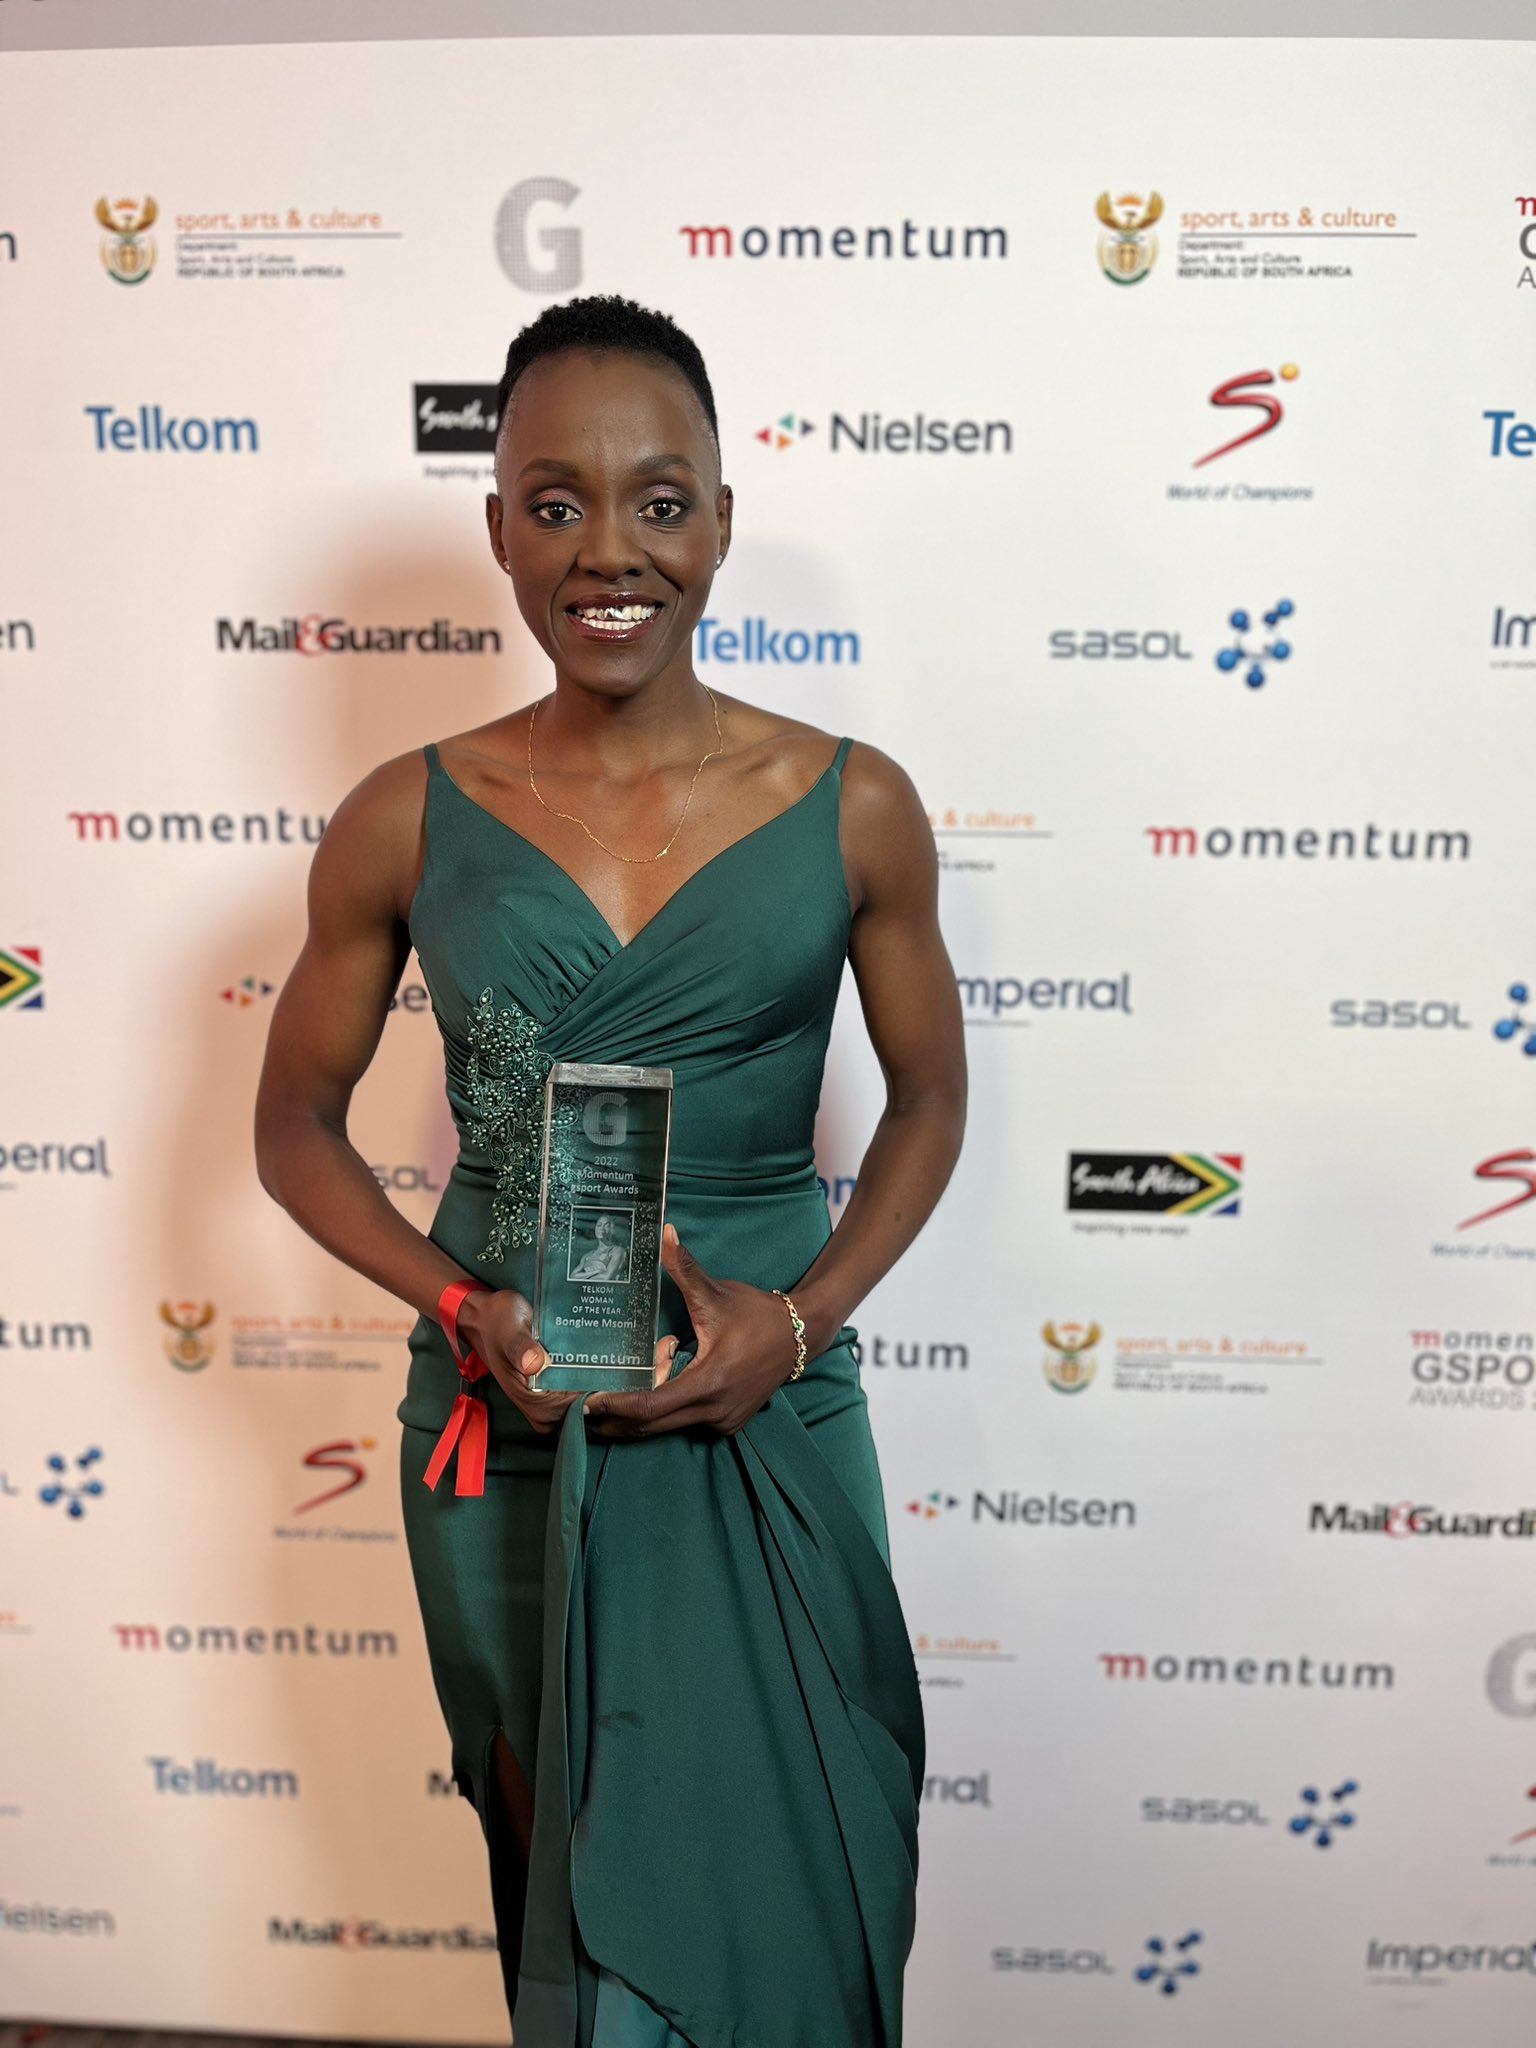 Bongiwe Msomi won the Telkom Woman of the Year Award at the 2022 Momentum gsport Awards held at the Wanderers Club on Wednesday evening, 14 September 2022. She the UJ Netball Club Manager and Coach as well as the SPAR Proteas Captain